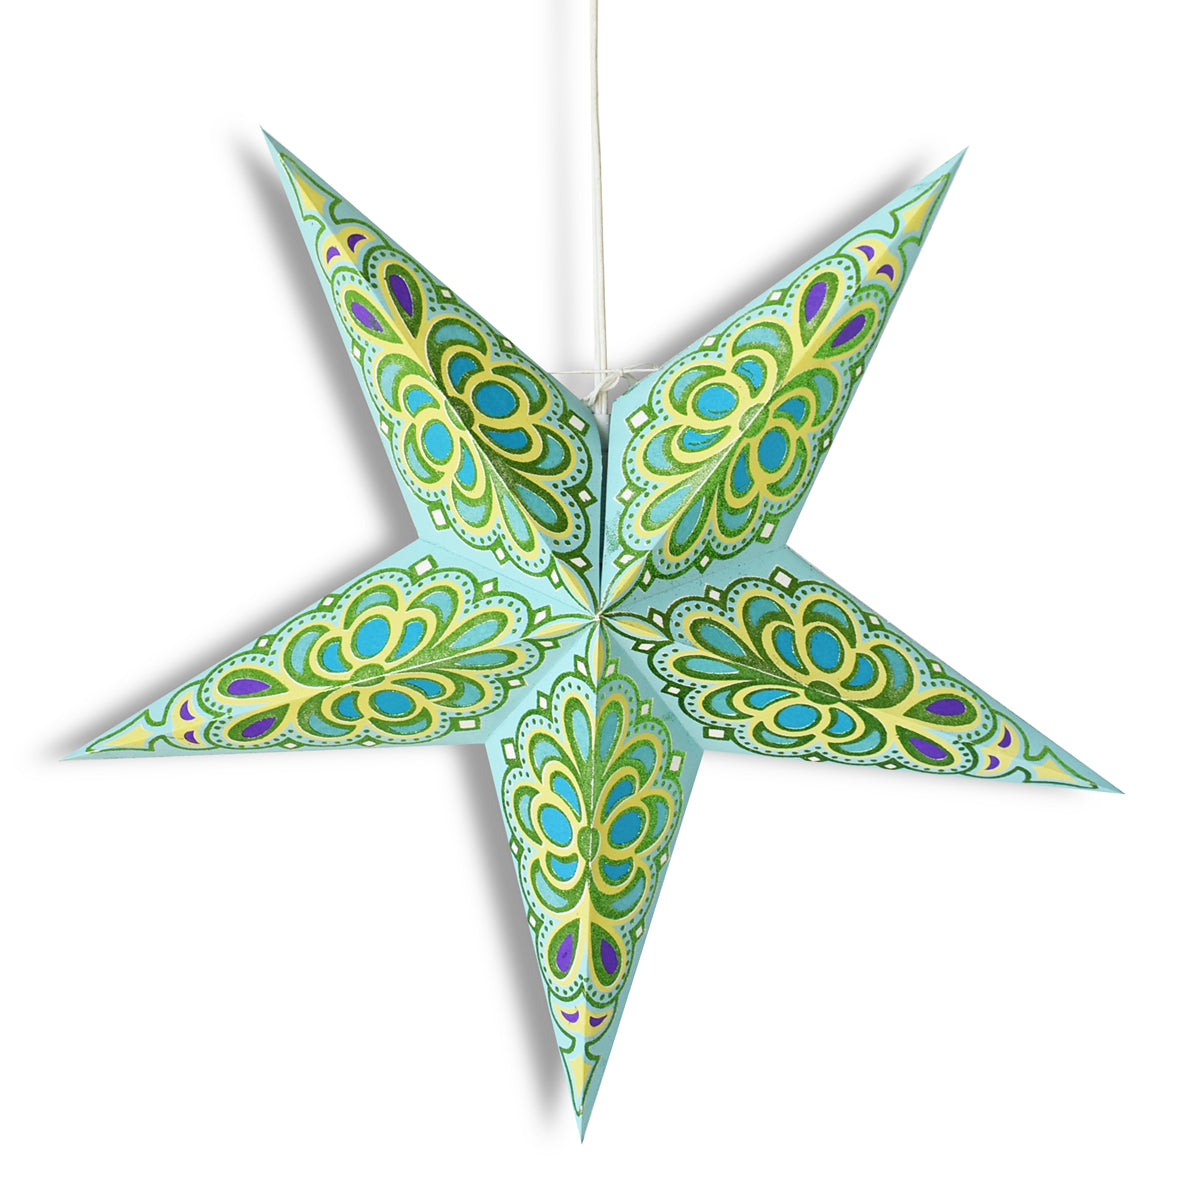 3-PACK + Cord | Green / Turquoise Merry Glitter 24&quot; Illuminated Paper Star Lanterns and Lamp Cord Hanging Decorations - PaperLanternStore.com - Paper Lanterns, Decor, Party Lights &amp; More